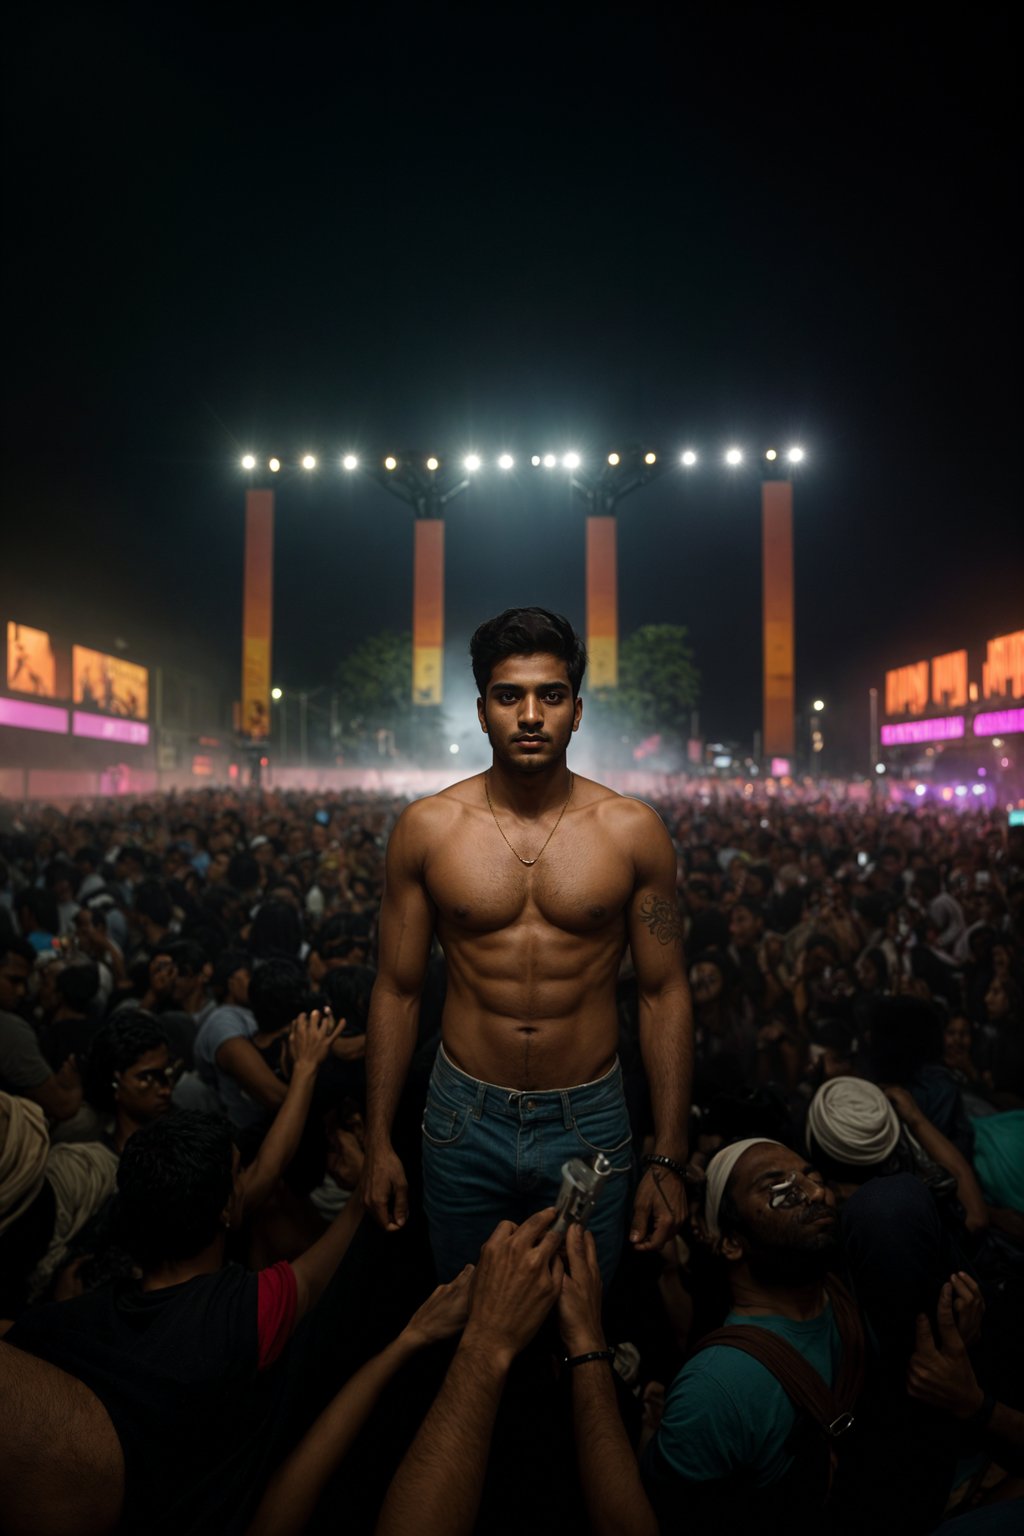 a stunning man surrounded by  a crowd of fellow festival-goers, capturing the sense of community and celebration at the festival